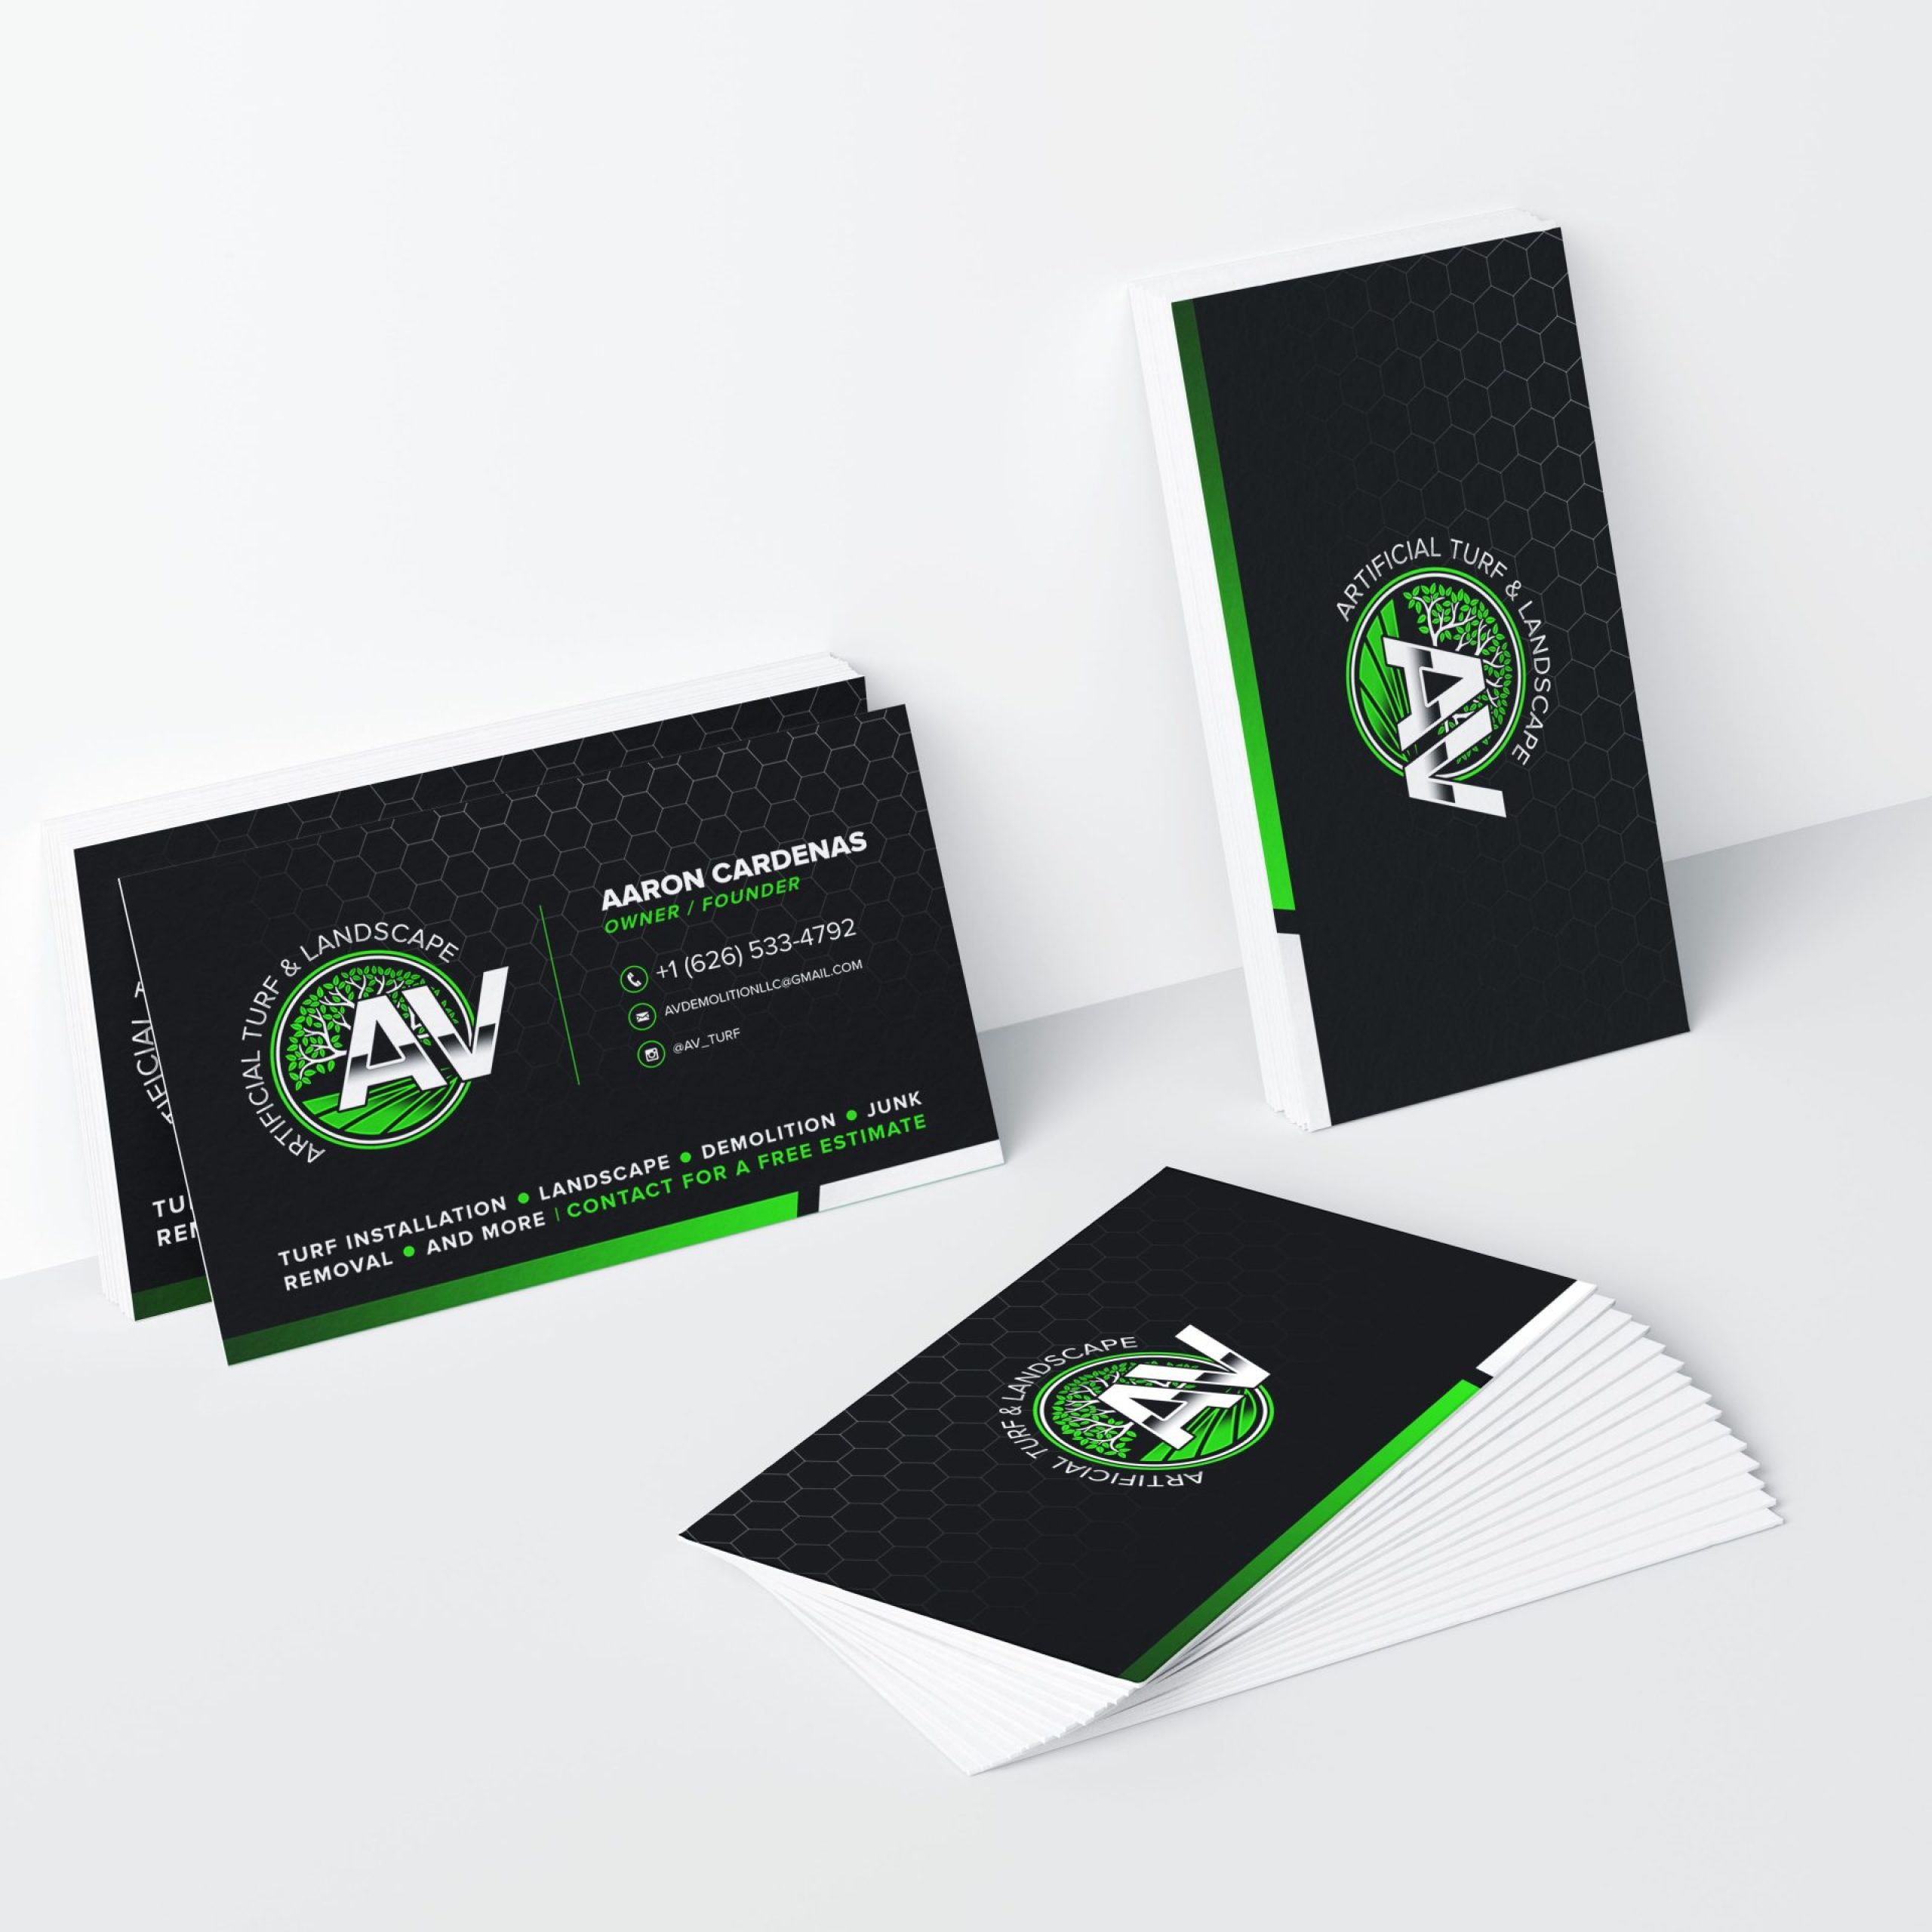 turf and landscaping lawn care business card design